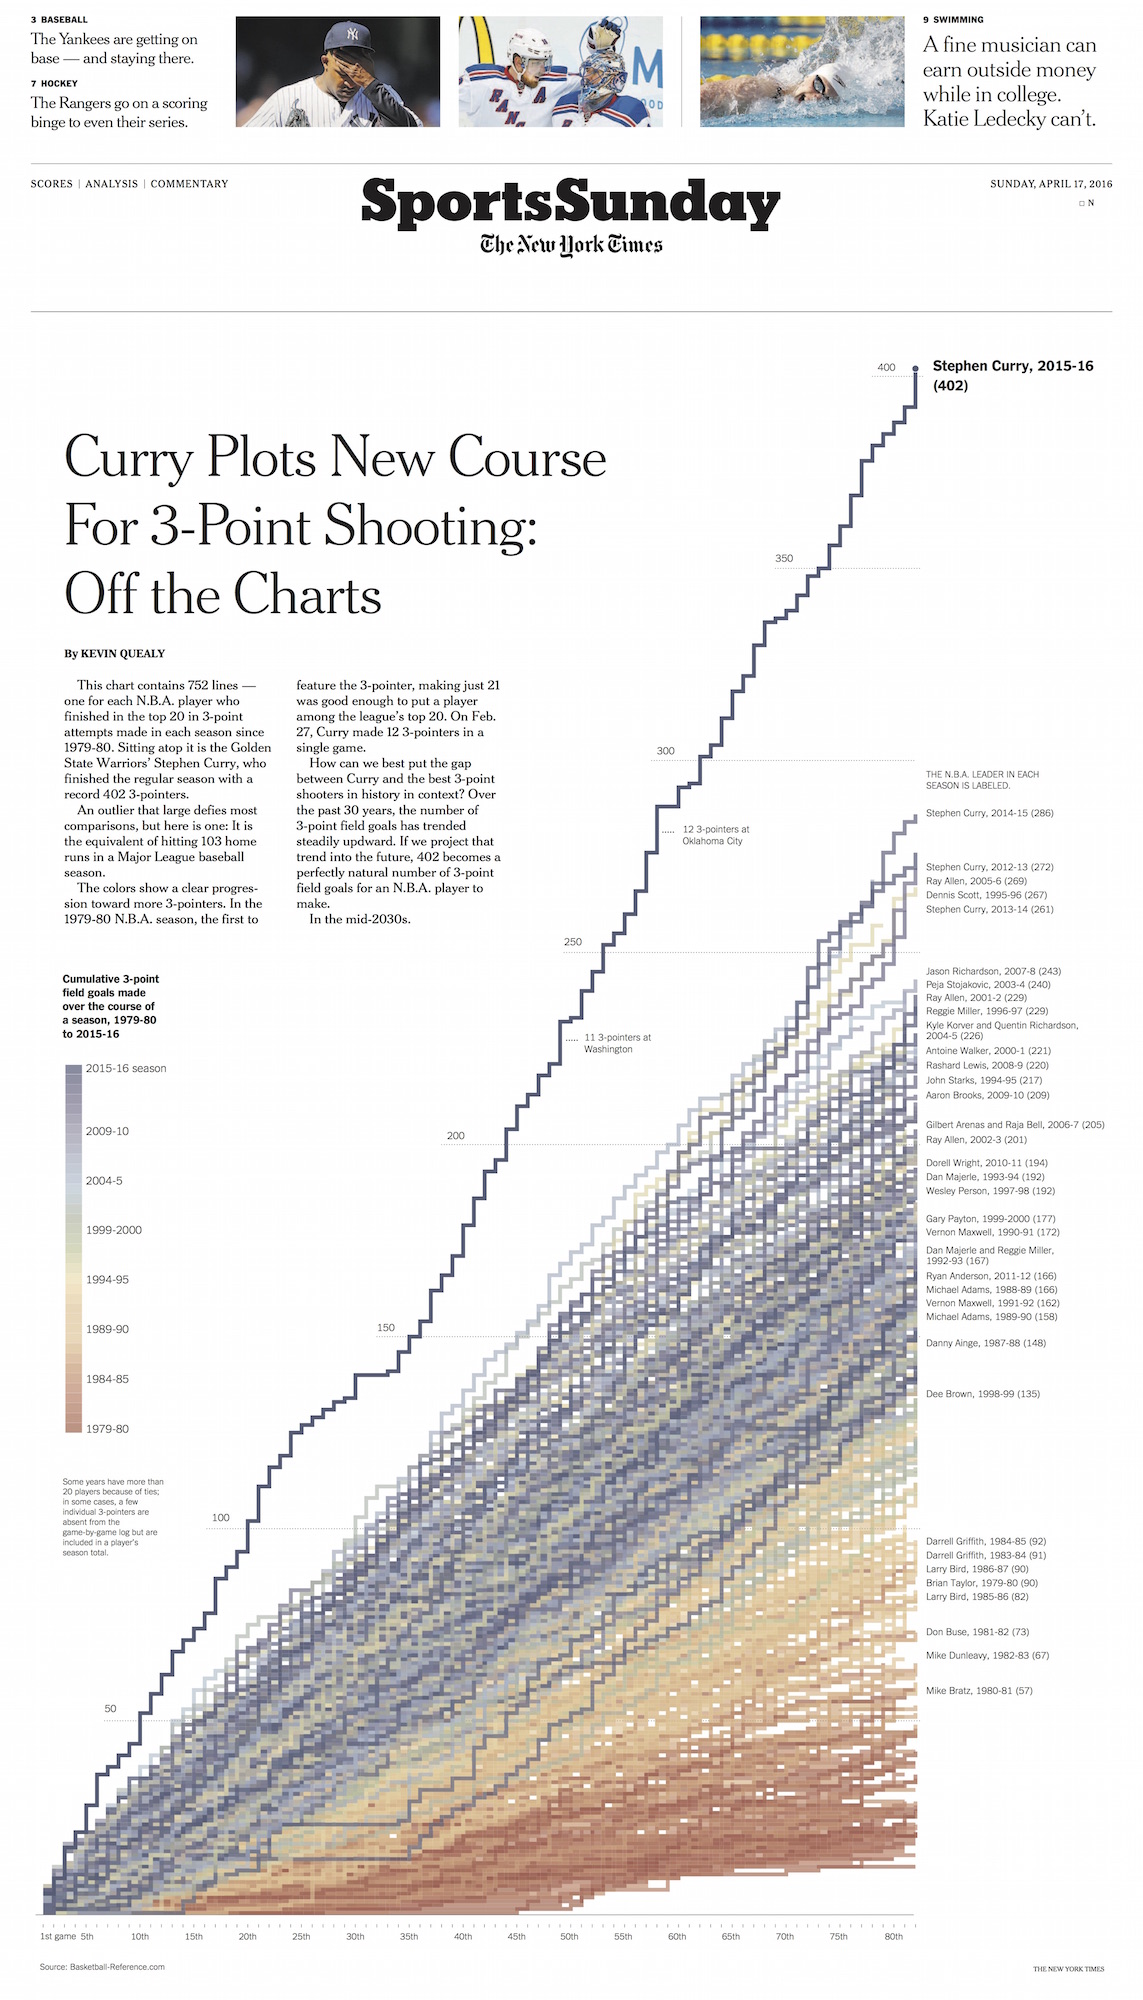 Steph Curry’s 3-Point Record in Context: Off the Charts